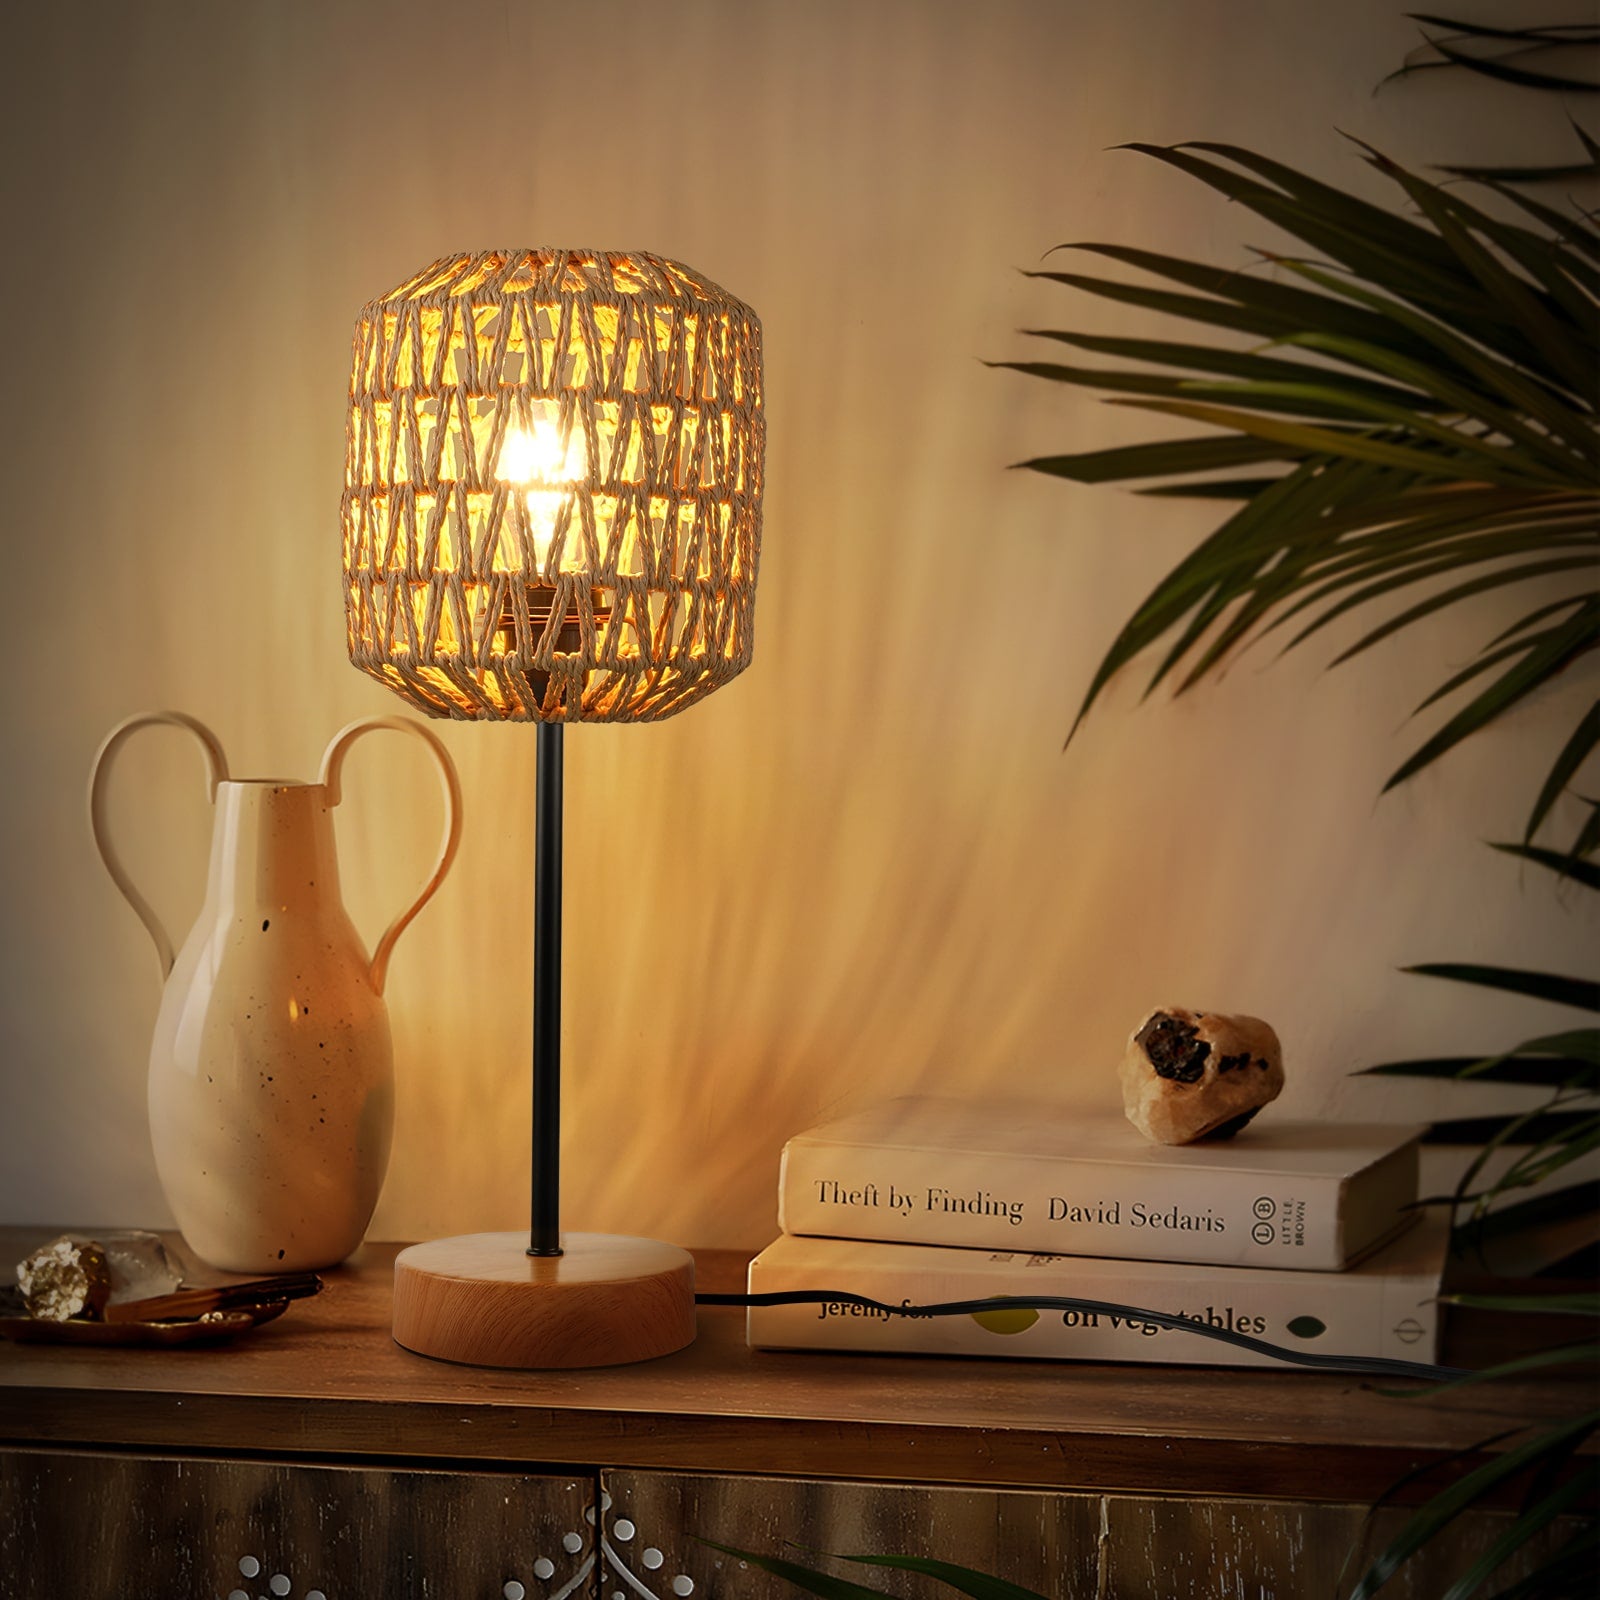 N02 Vintage Rattan Table Lamp with USB Charging Ports and AC Outlet for Bedroom